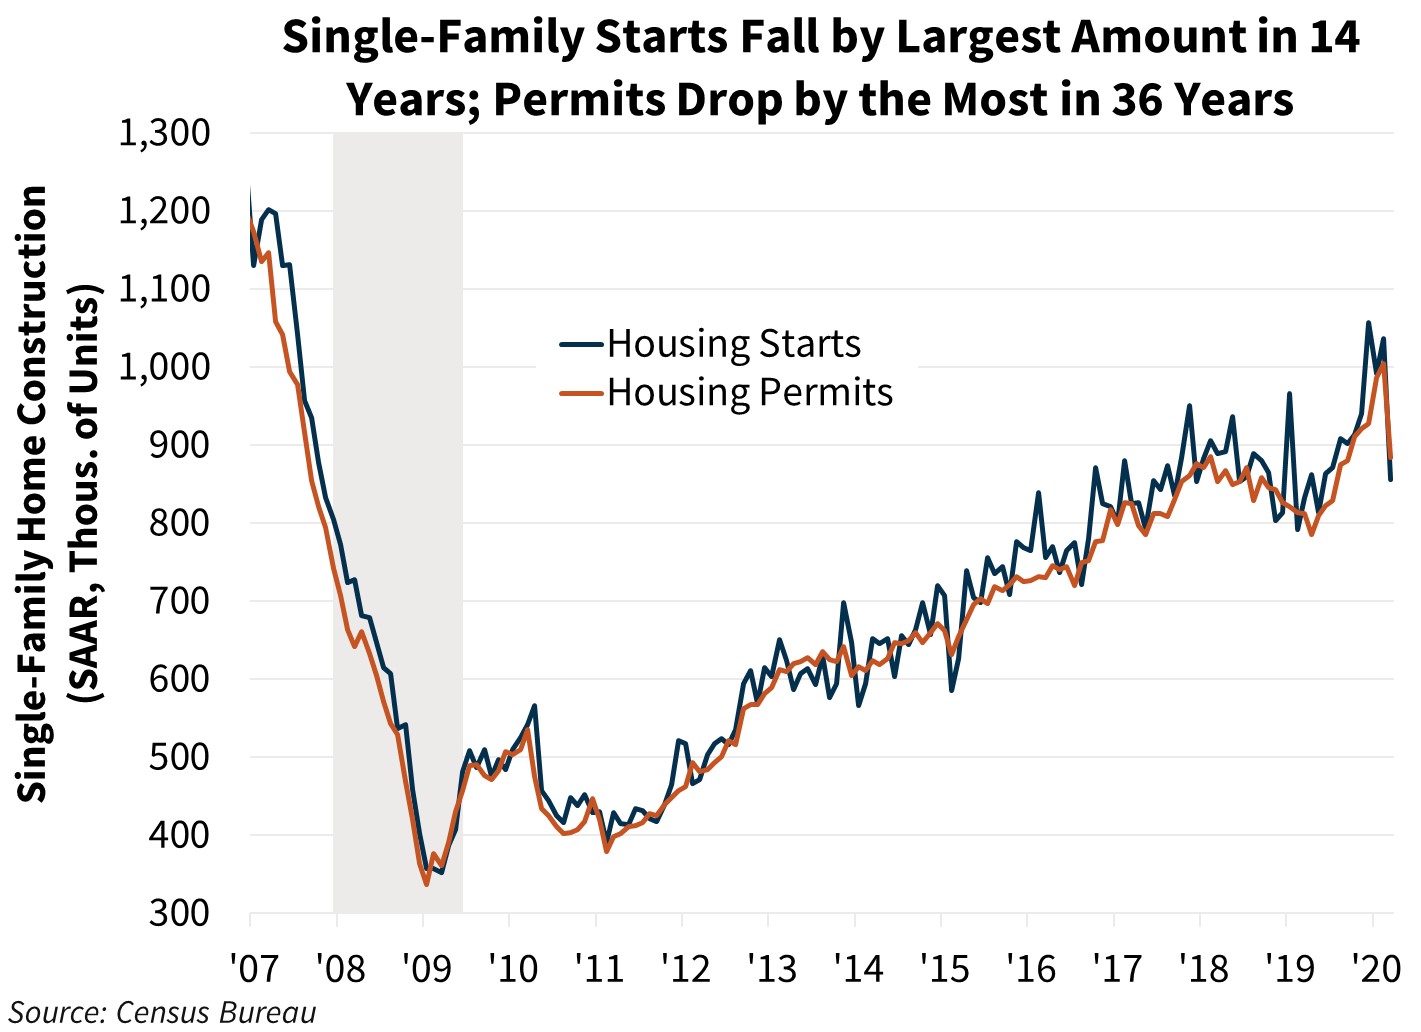  Single-Family Starts Fall by Largest Amount in the 14 Years, Permits Drop by the Most in 36 Years 